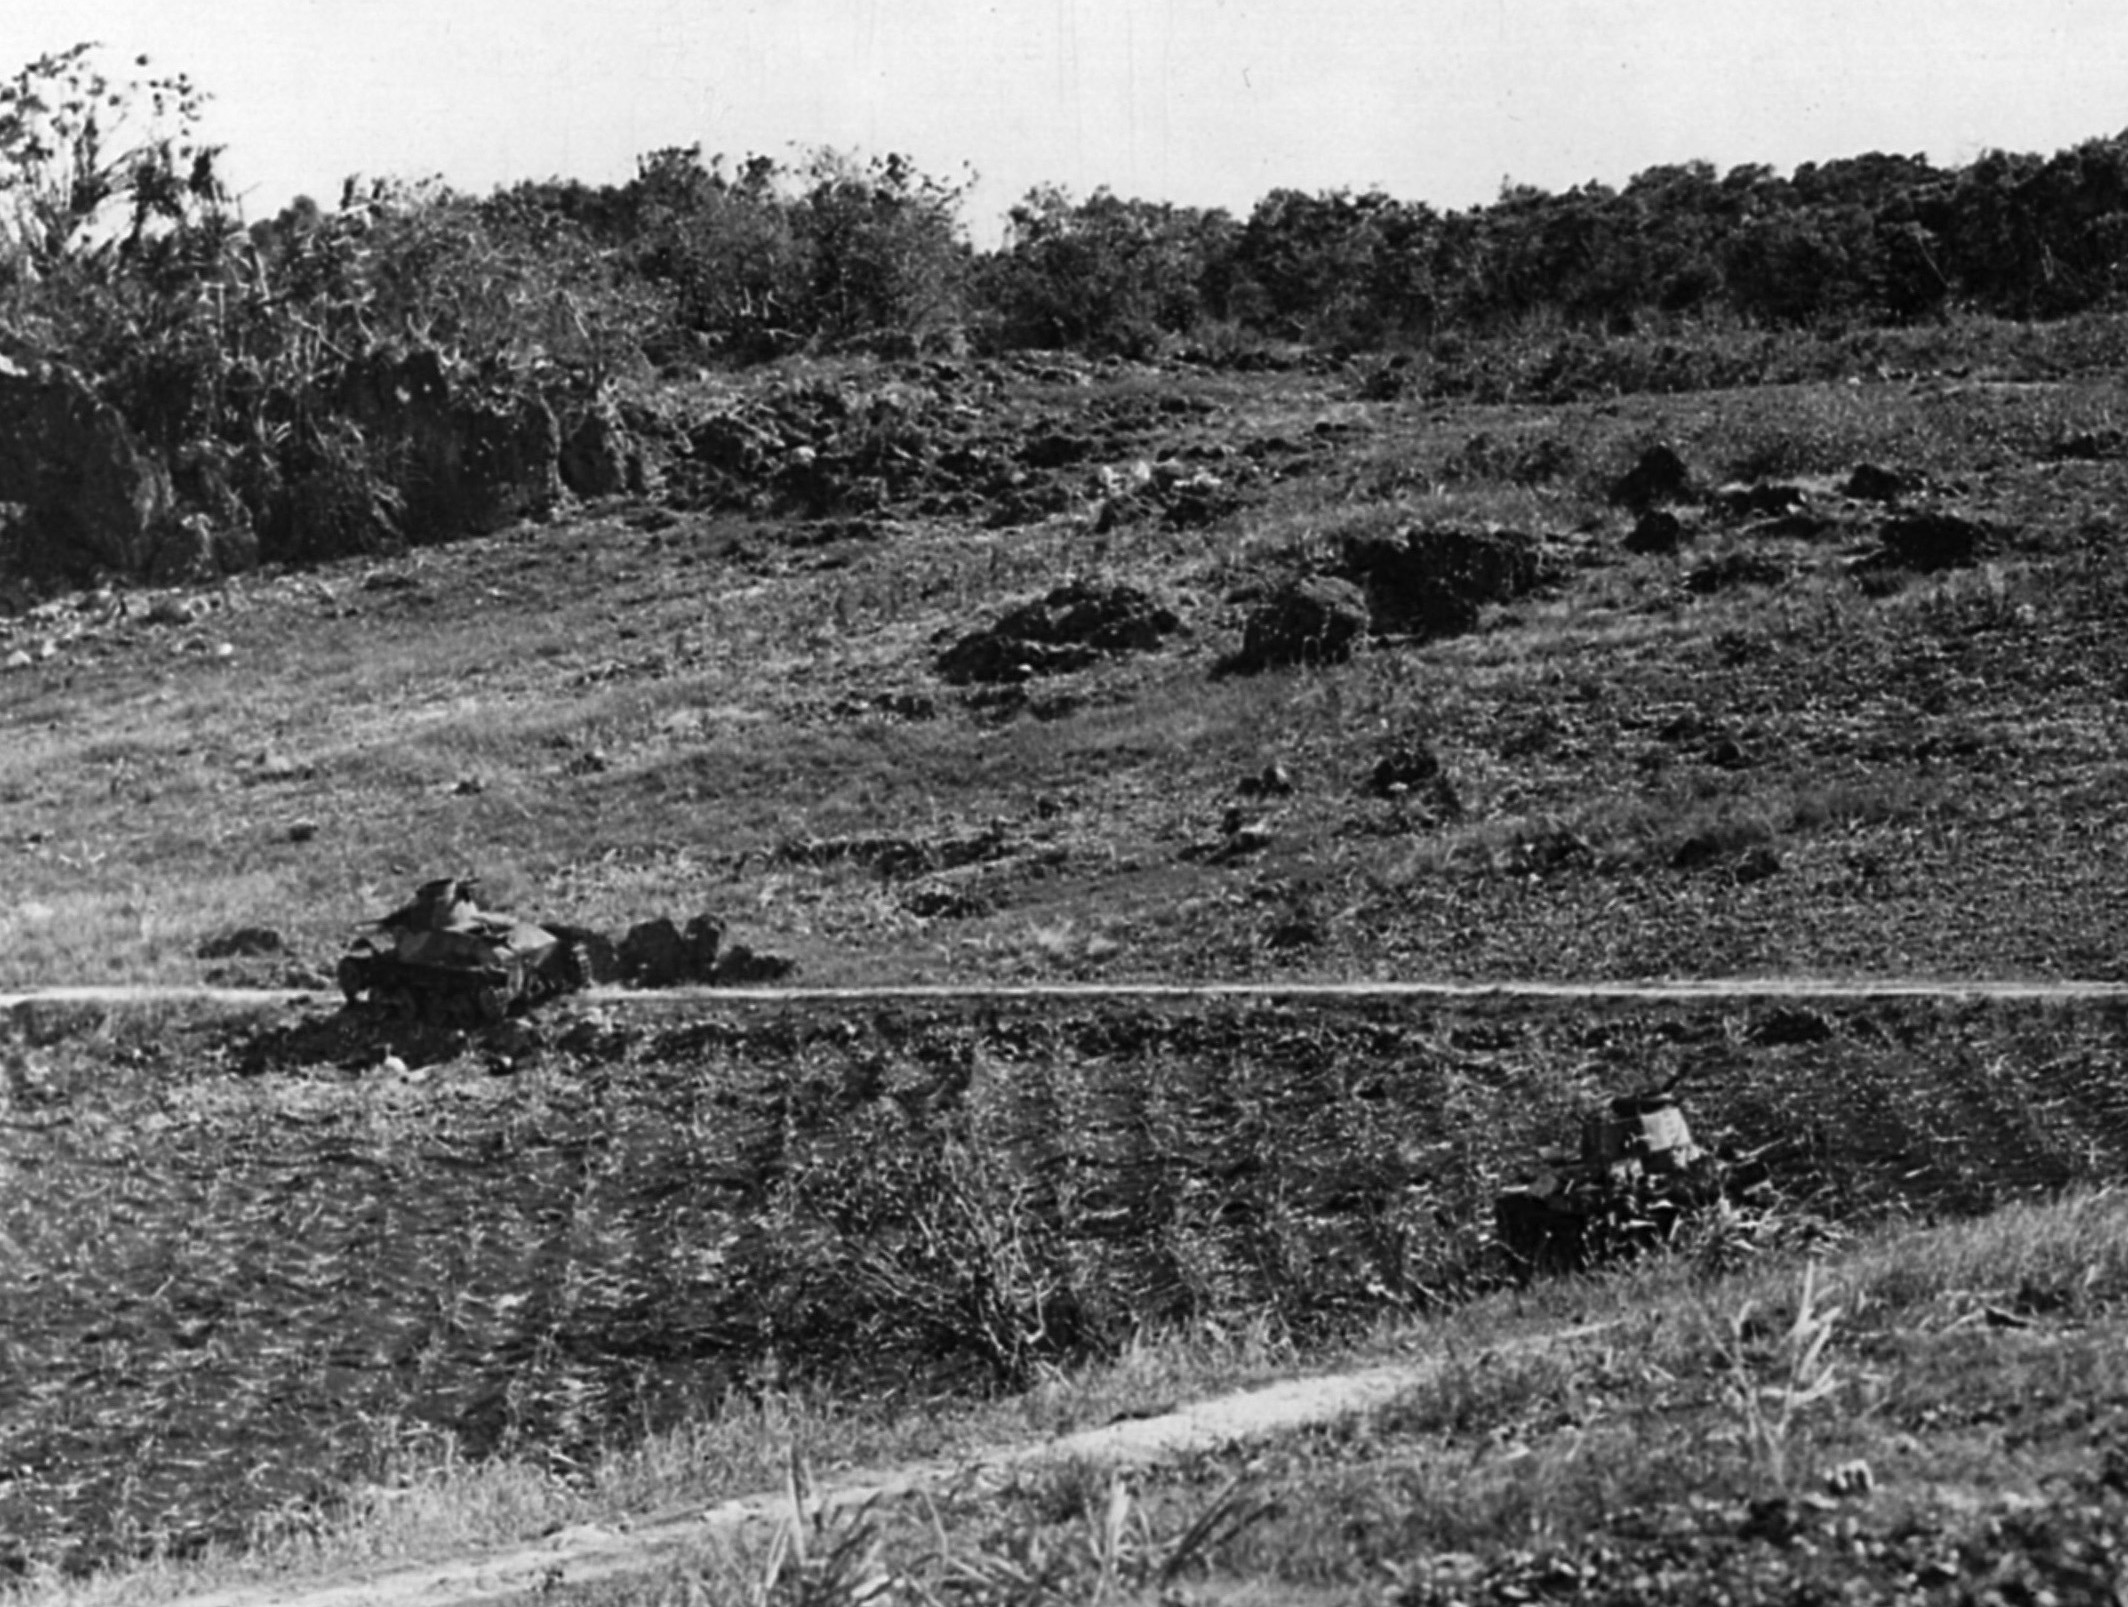 Scorched earth and burned-out shells of Japanese tanks are all that remain at this hillside on Saipan.